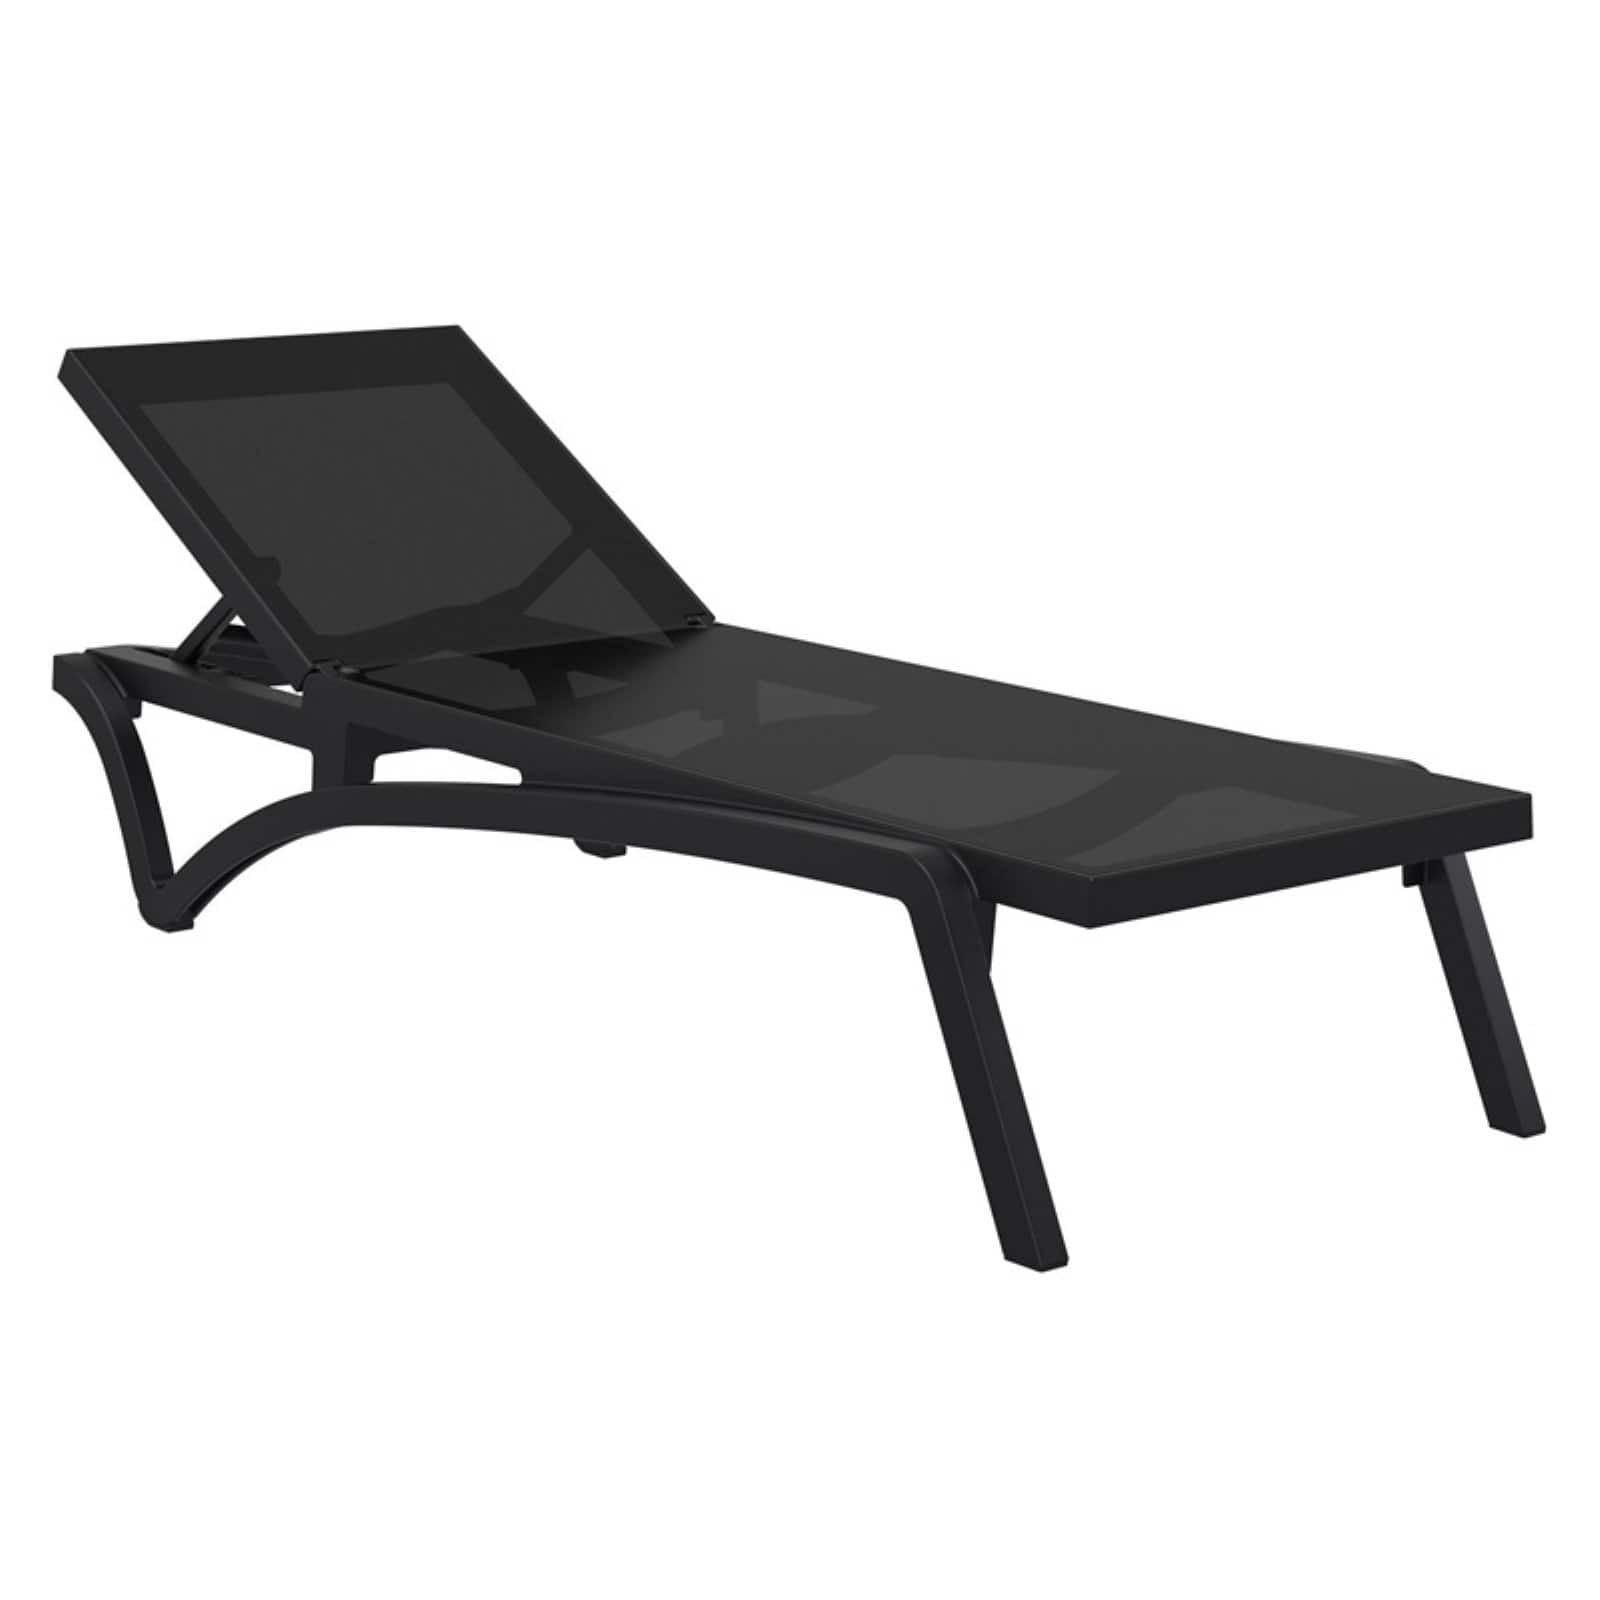 Compamia Pacific Chaise Lounge with Black Sling in Black - image 2 of 11